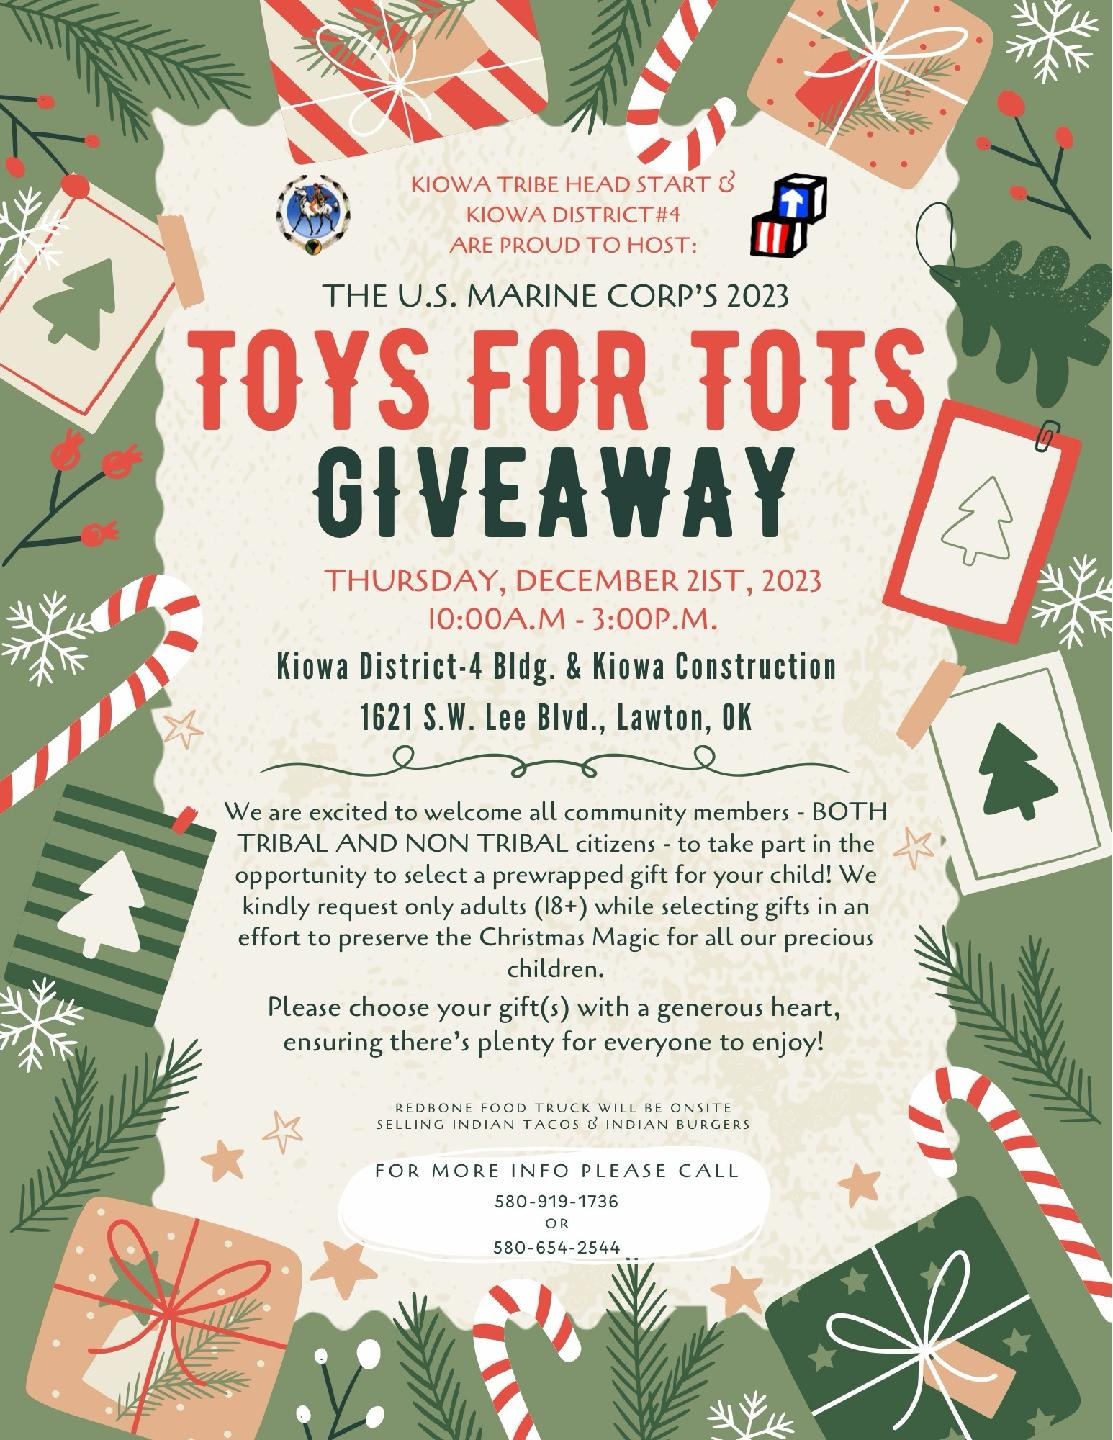 Toys for Tots Giveaway